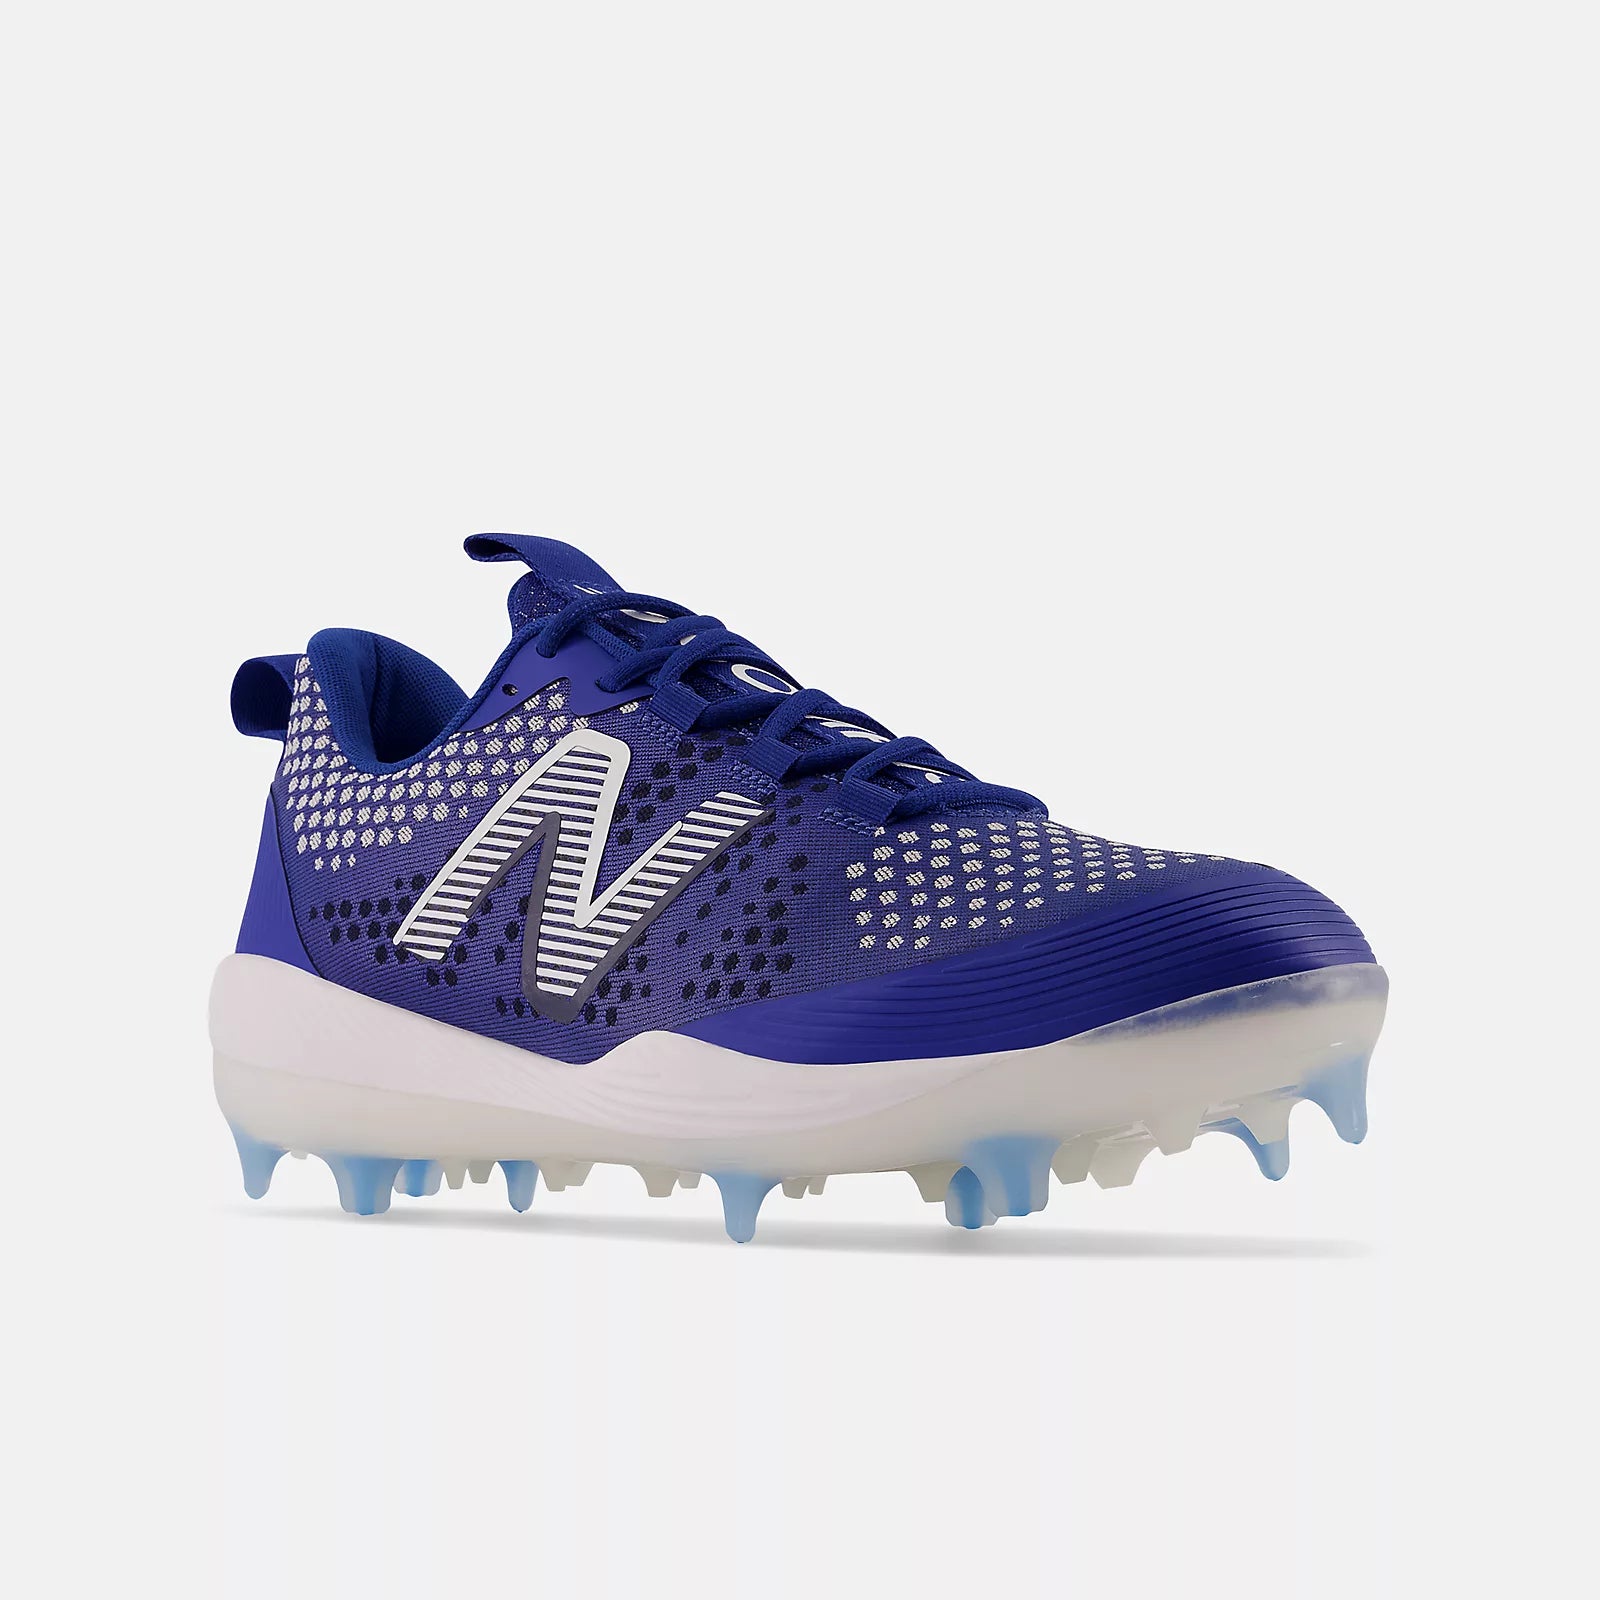 New Balance - FuelCell COMPv3 Royal Hybrid Baseball Cleats (LCOMPTB3)